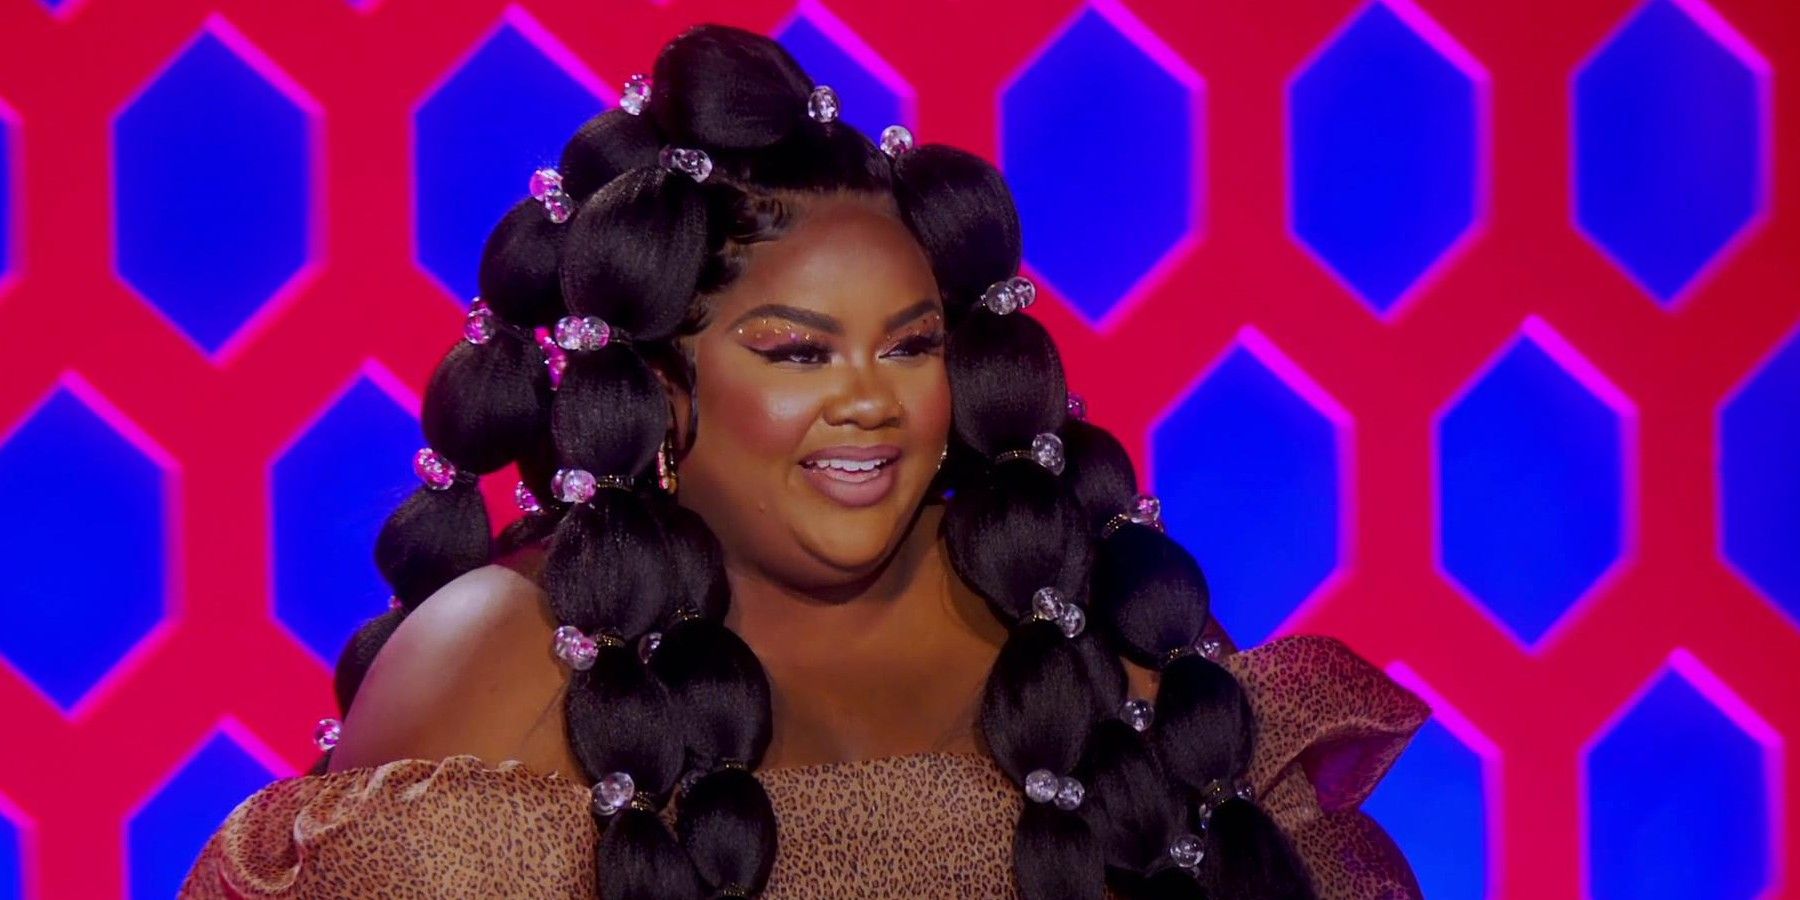 The Best Guest Judges To Appear On RuPaul’s Drag Race (& Why)